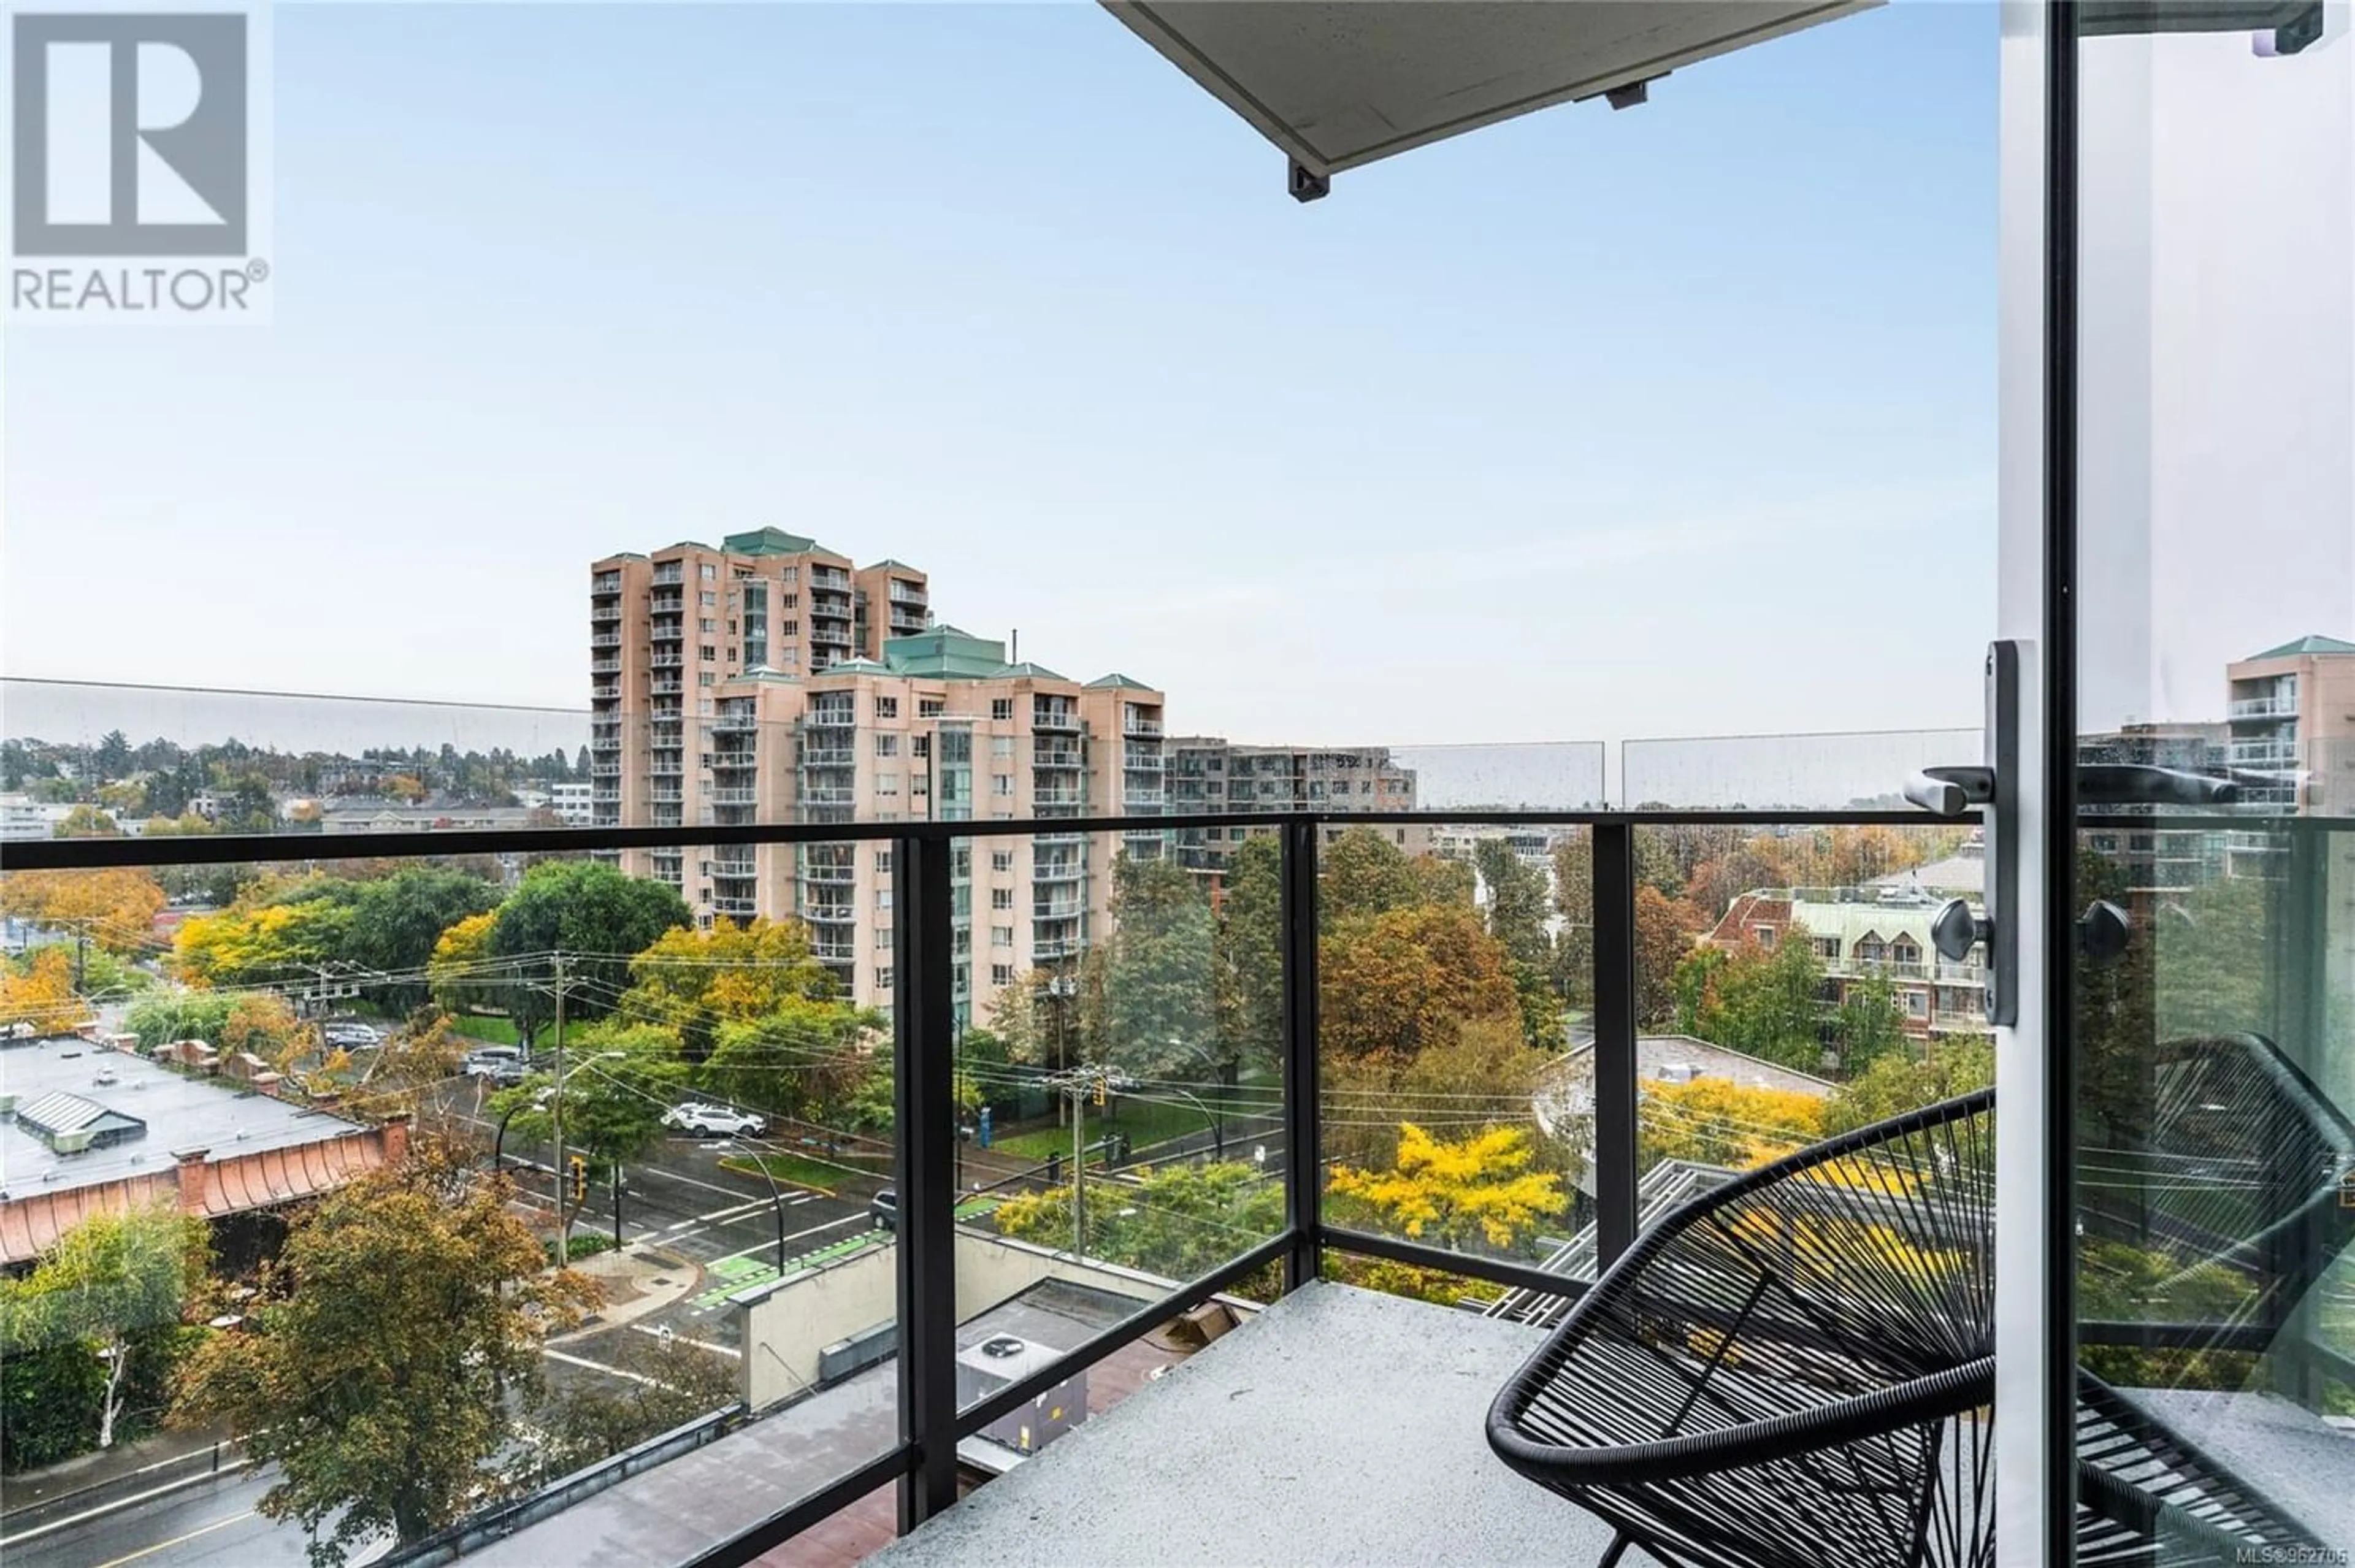 Balcony in the apartment for 706 960 Yates St, Victoria British Columbia V8V3W3